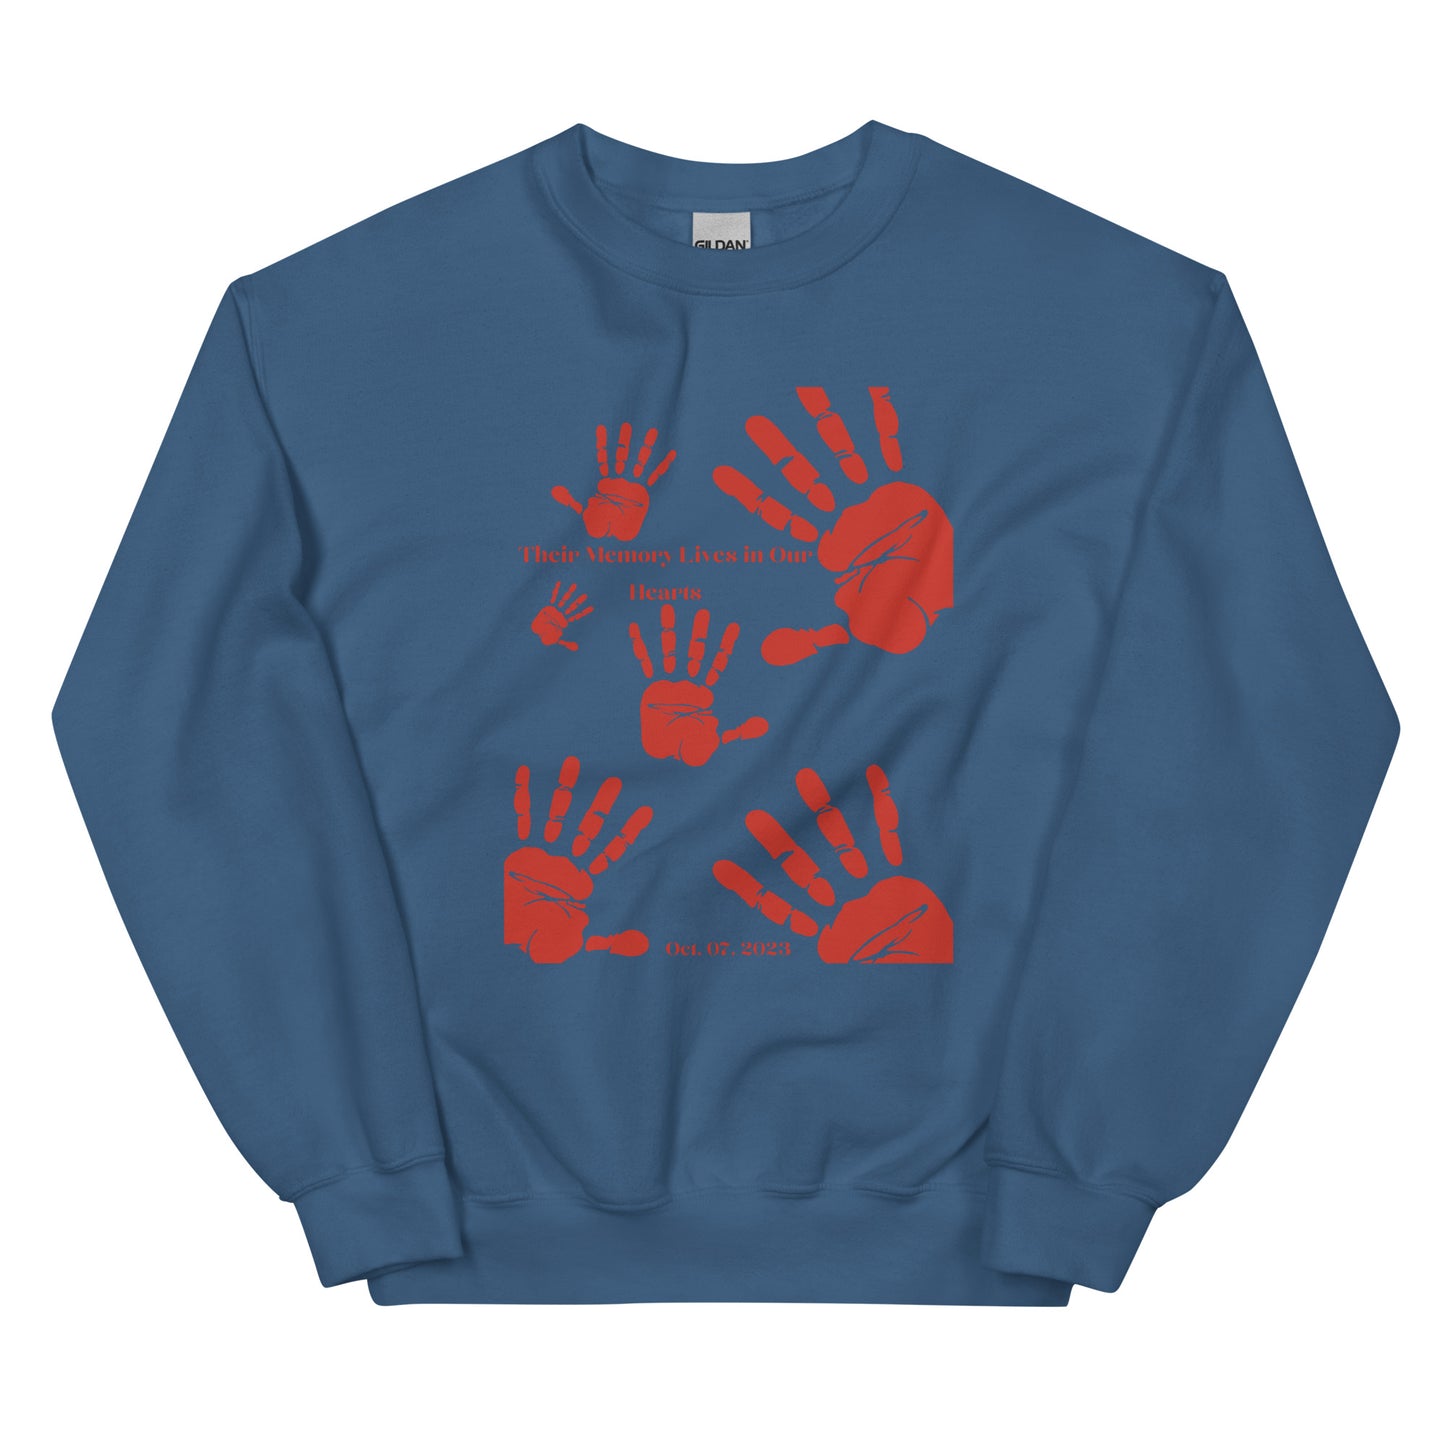 Their memory lives in our hearts - Unisex Sweatshirt (10 colors)